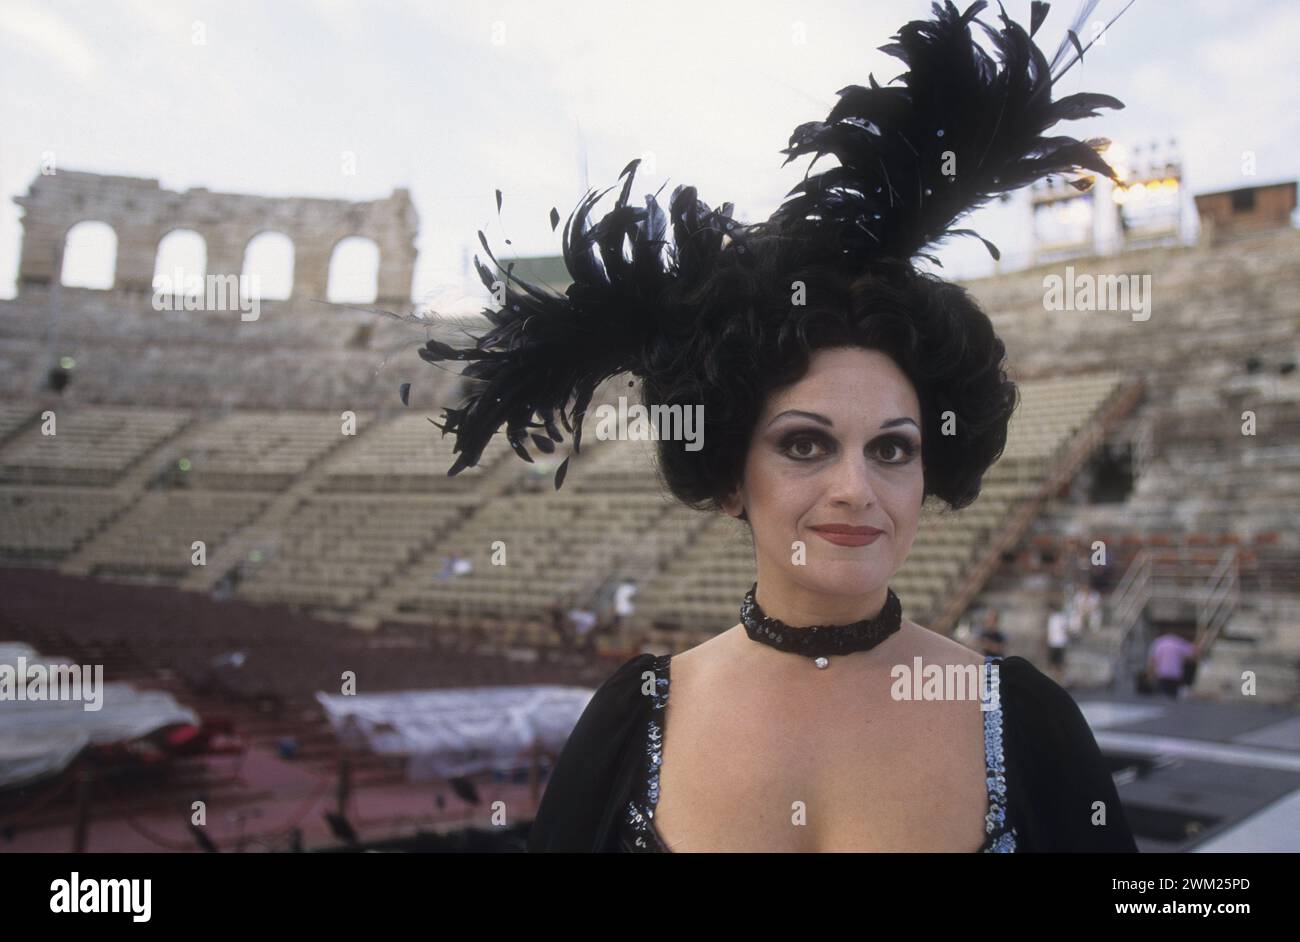 MME4782347 Verona Arena, summer 1999. Soprano Cecilia Gasdia before performing in “” The Merry Widow”” by Franz Lerhar, directed by Beni Montresor/Arena di Verona, estate 1999. Il soprano Cecilia Gasdia prima di esibirsi in “” La vedova allegra””” by Franz Lehar, with the region of Beni Montresor -; (add.info.: Verona Arena, summer 1999. Soprano Cecilia Gasdia before performing in “” The Merry Widow”” by Franz Lerhar, directed by Beni Montresor/Arena di Verona, estate 1999. Il soprano Cecilia Gasdia prima di esibirsi in “” La vedova allegra””” by Franz Lehar, with the region of Beni Montresor Stock Photo